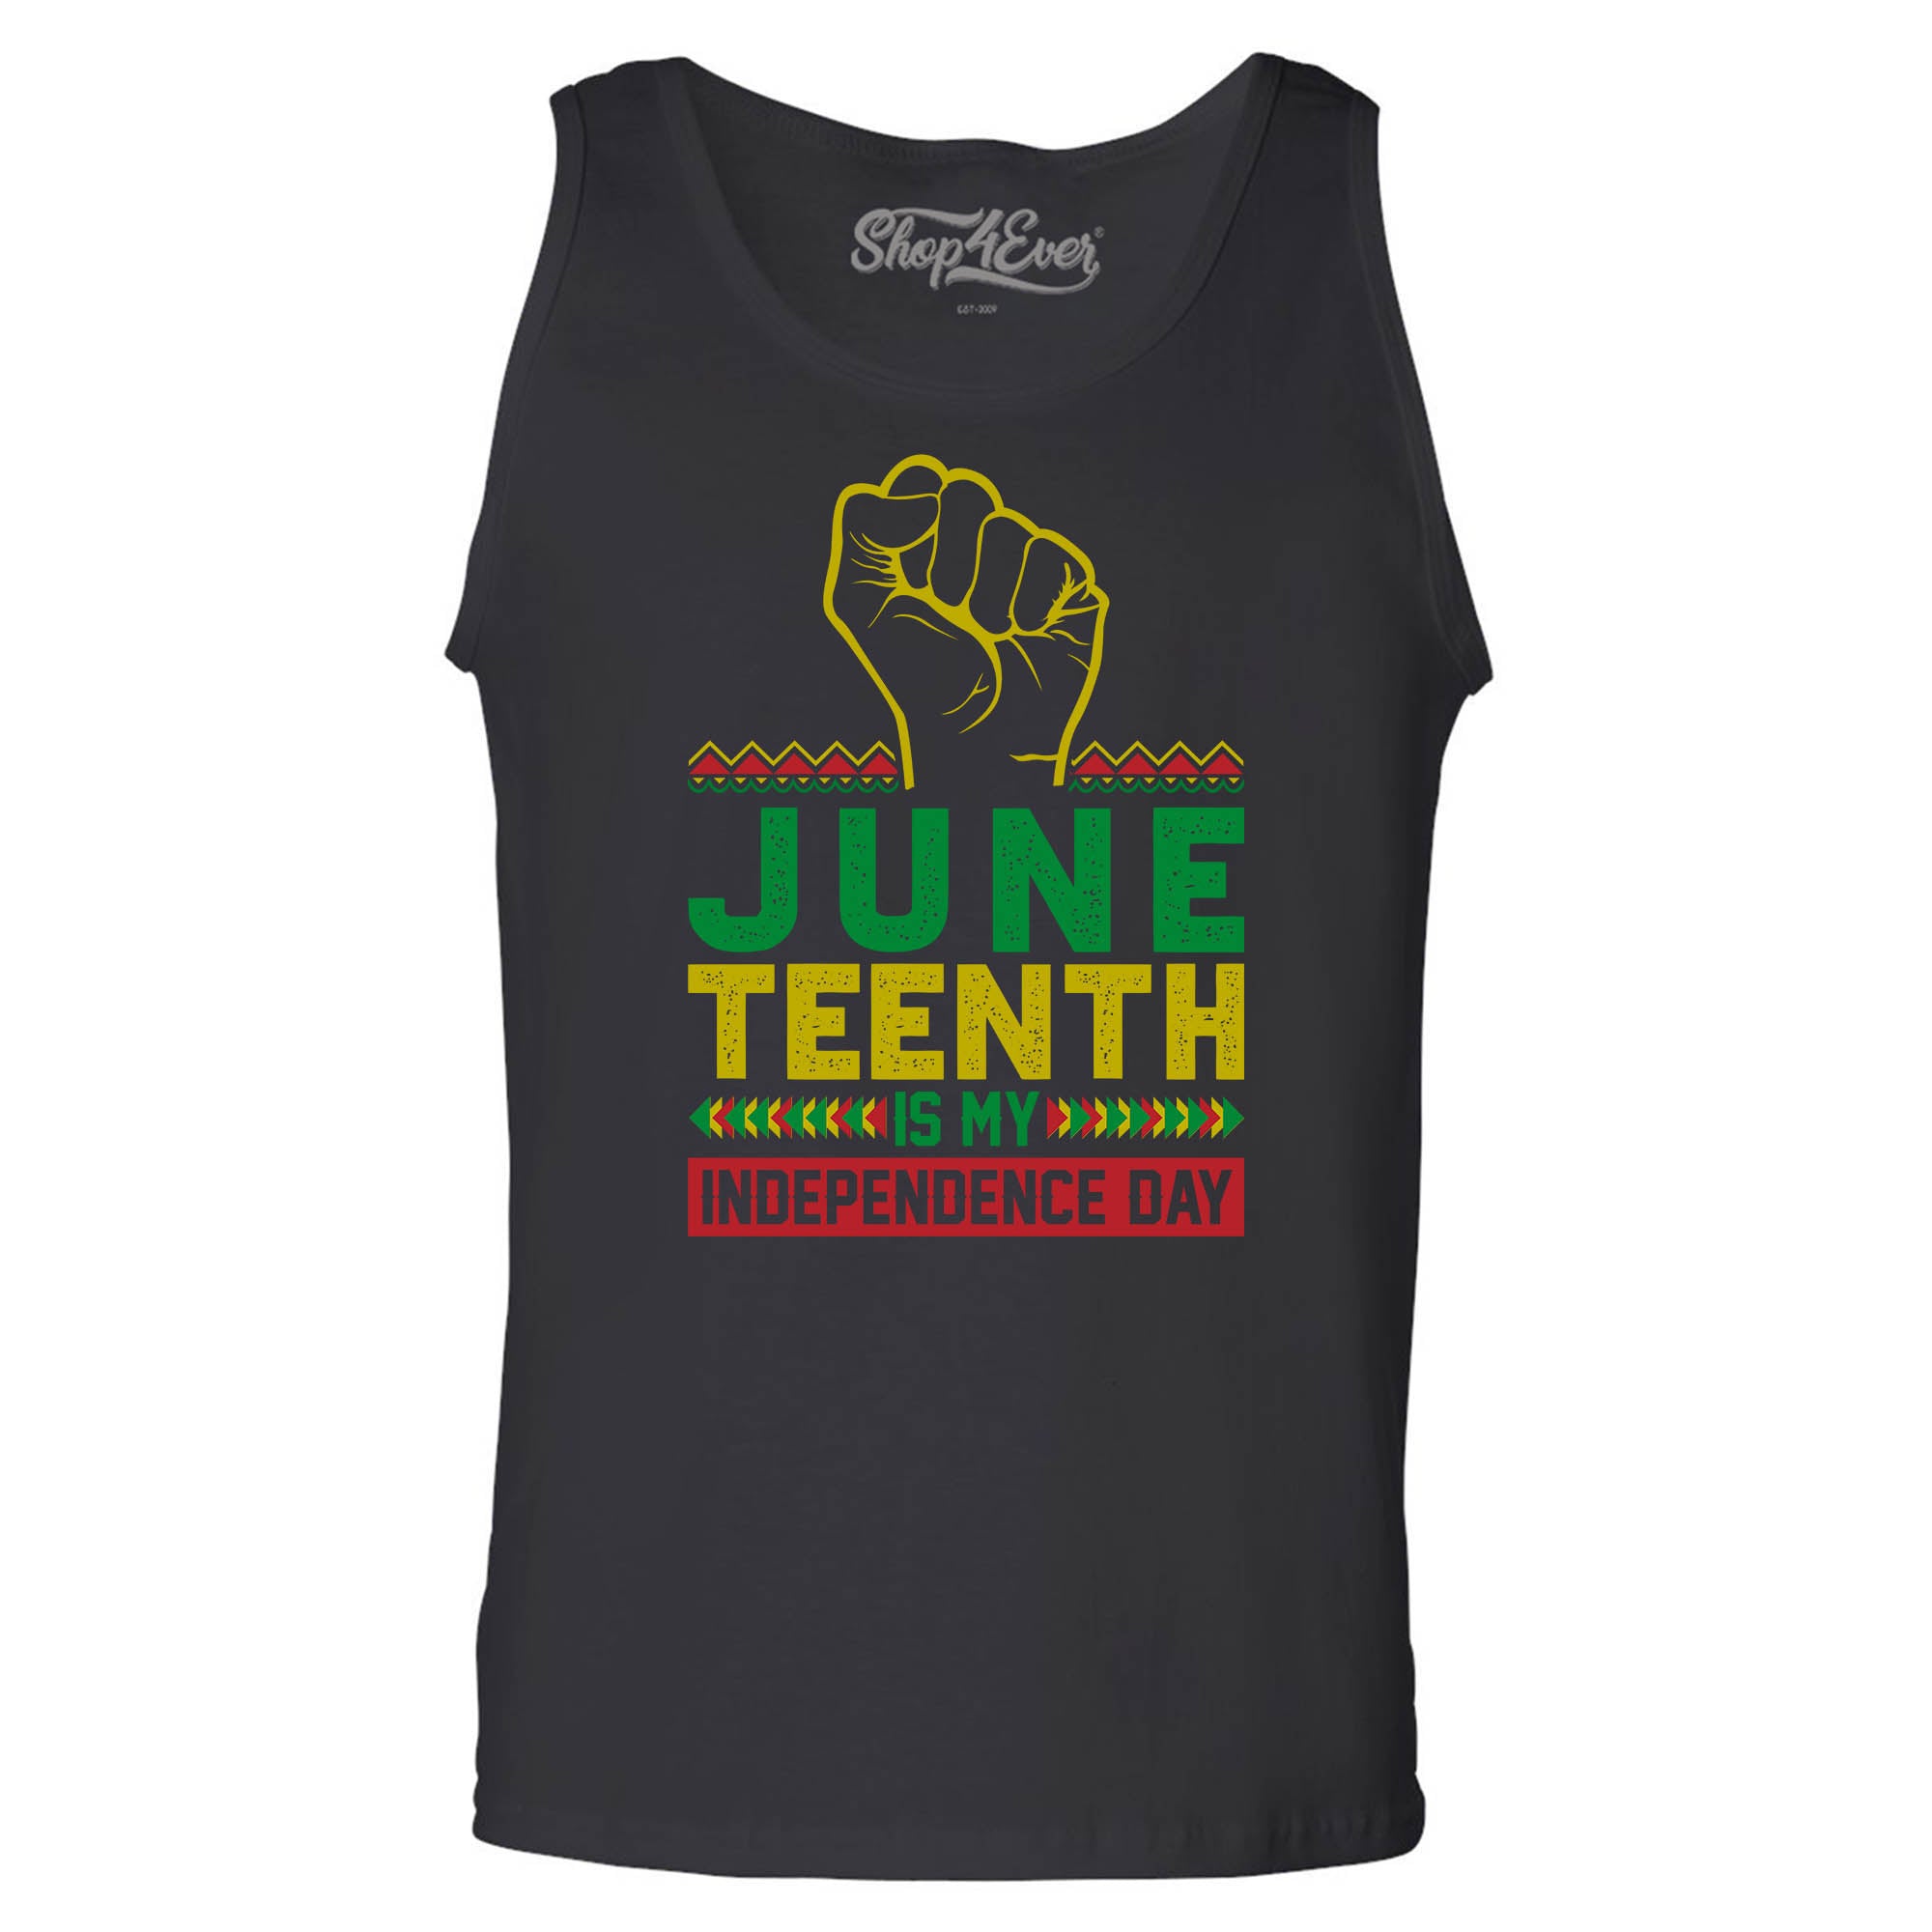 Juneteenth is My Independence Day June 19th 1865 Men's Tank Top